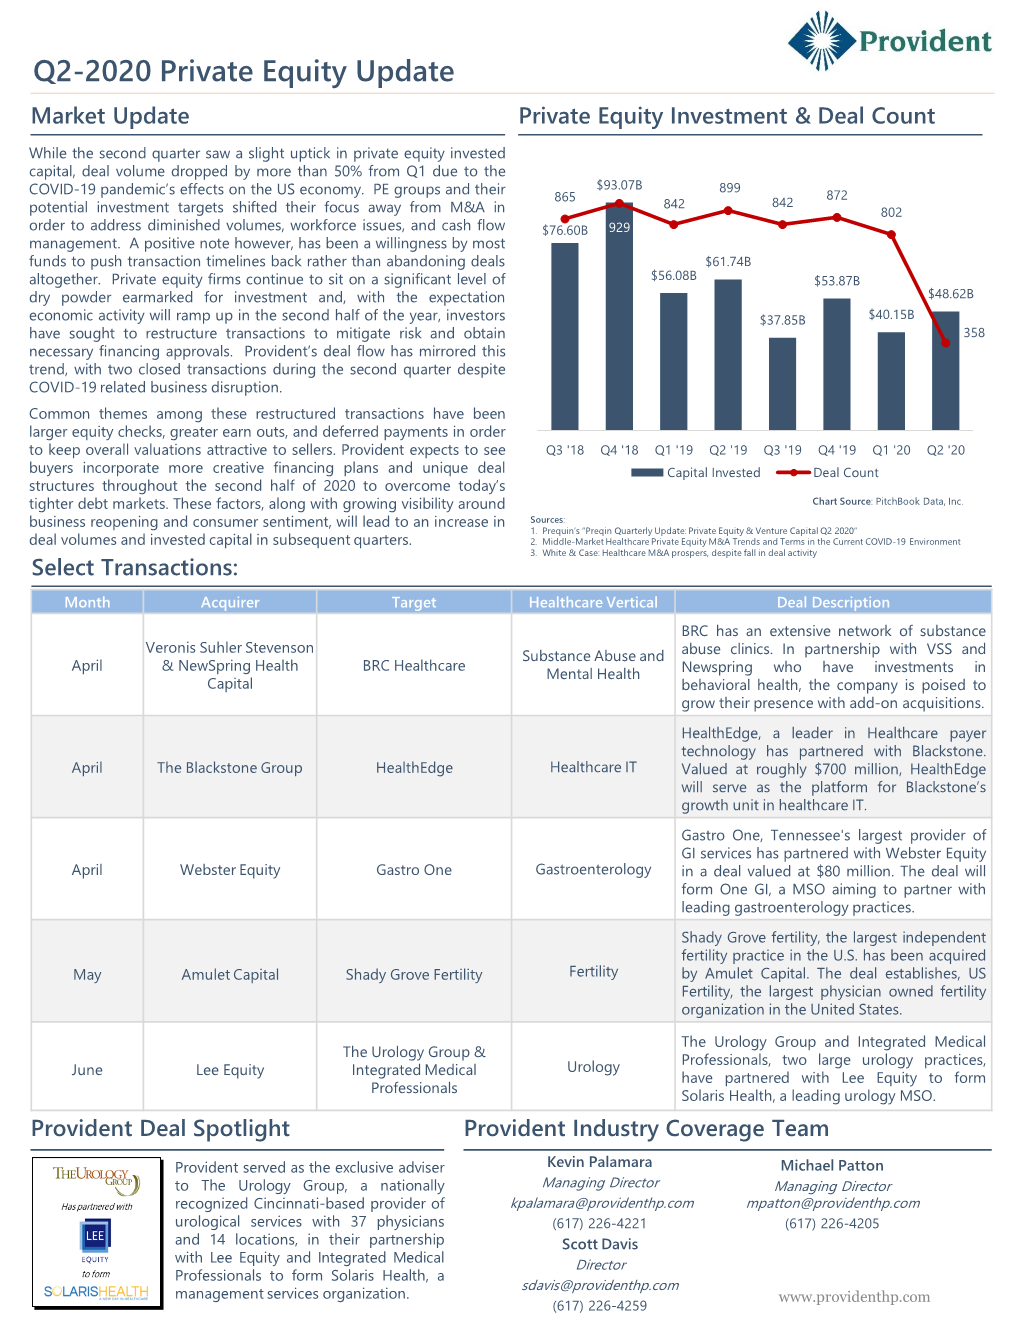 Q2-2020 Private Equity Update Market Update Private Equity Investment & Deal Count